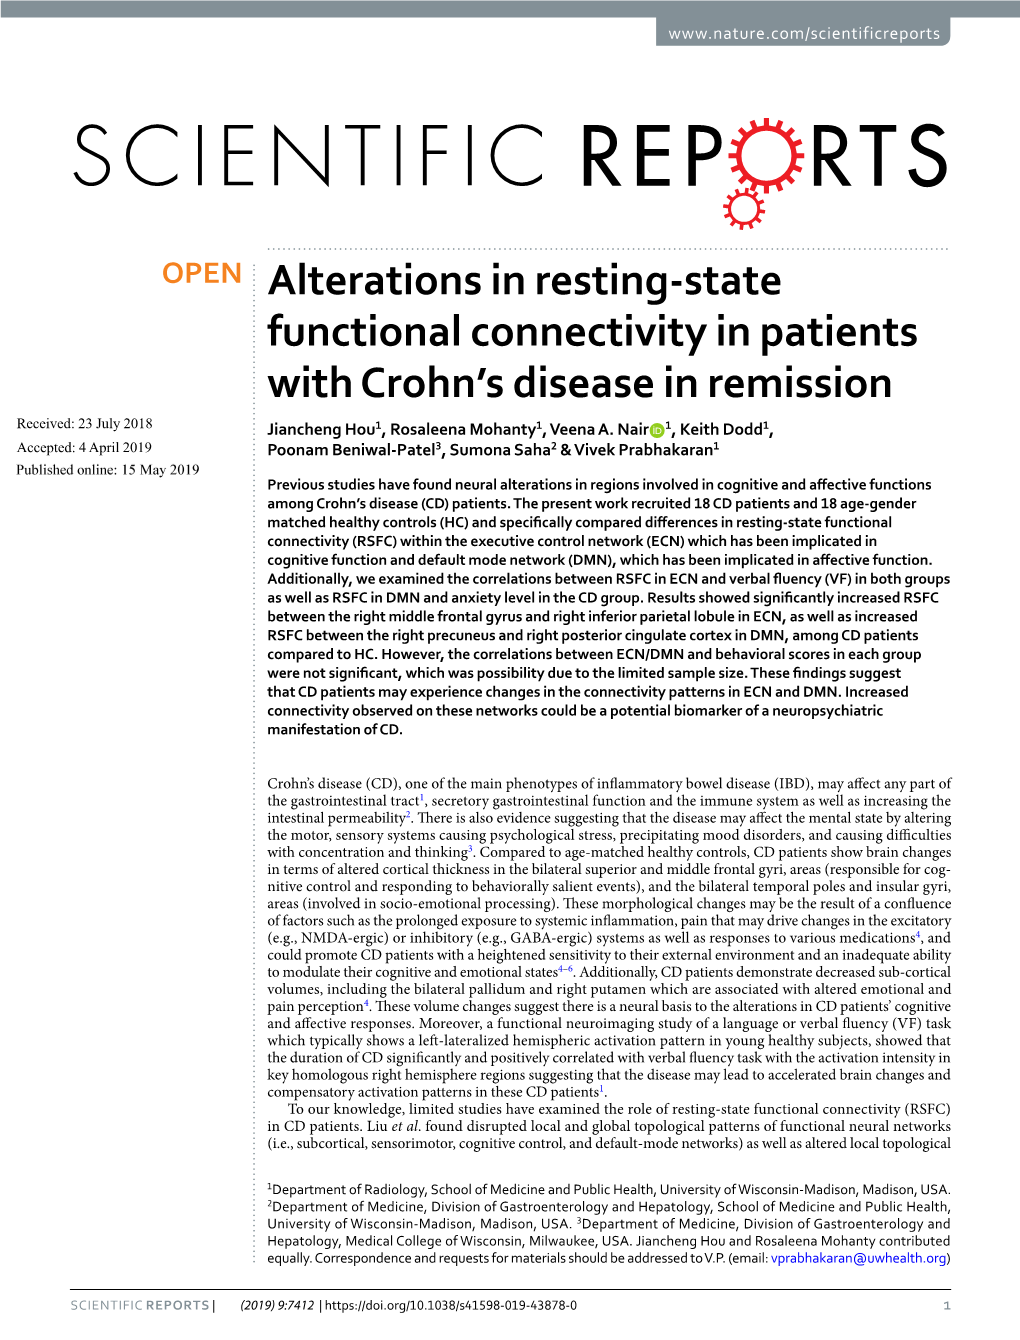 Alterations in Resting-State Functional Connectivity in Patients with Crohn's